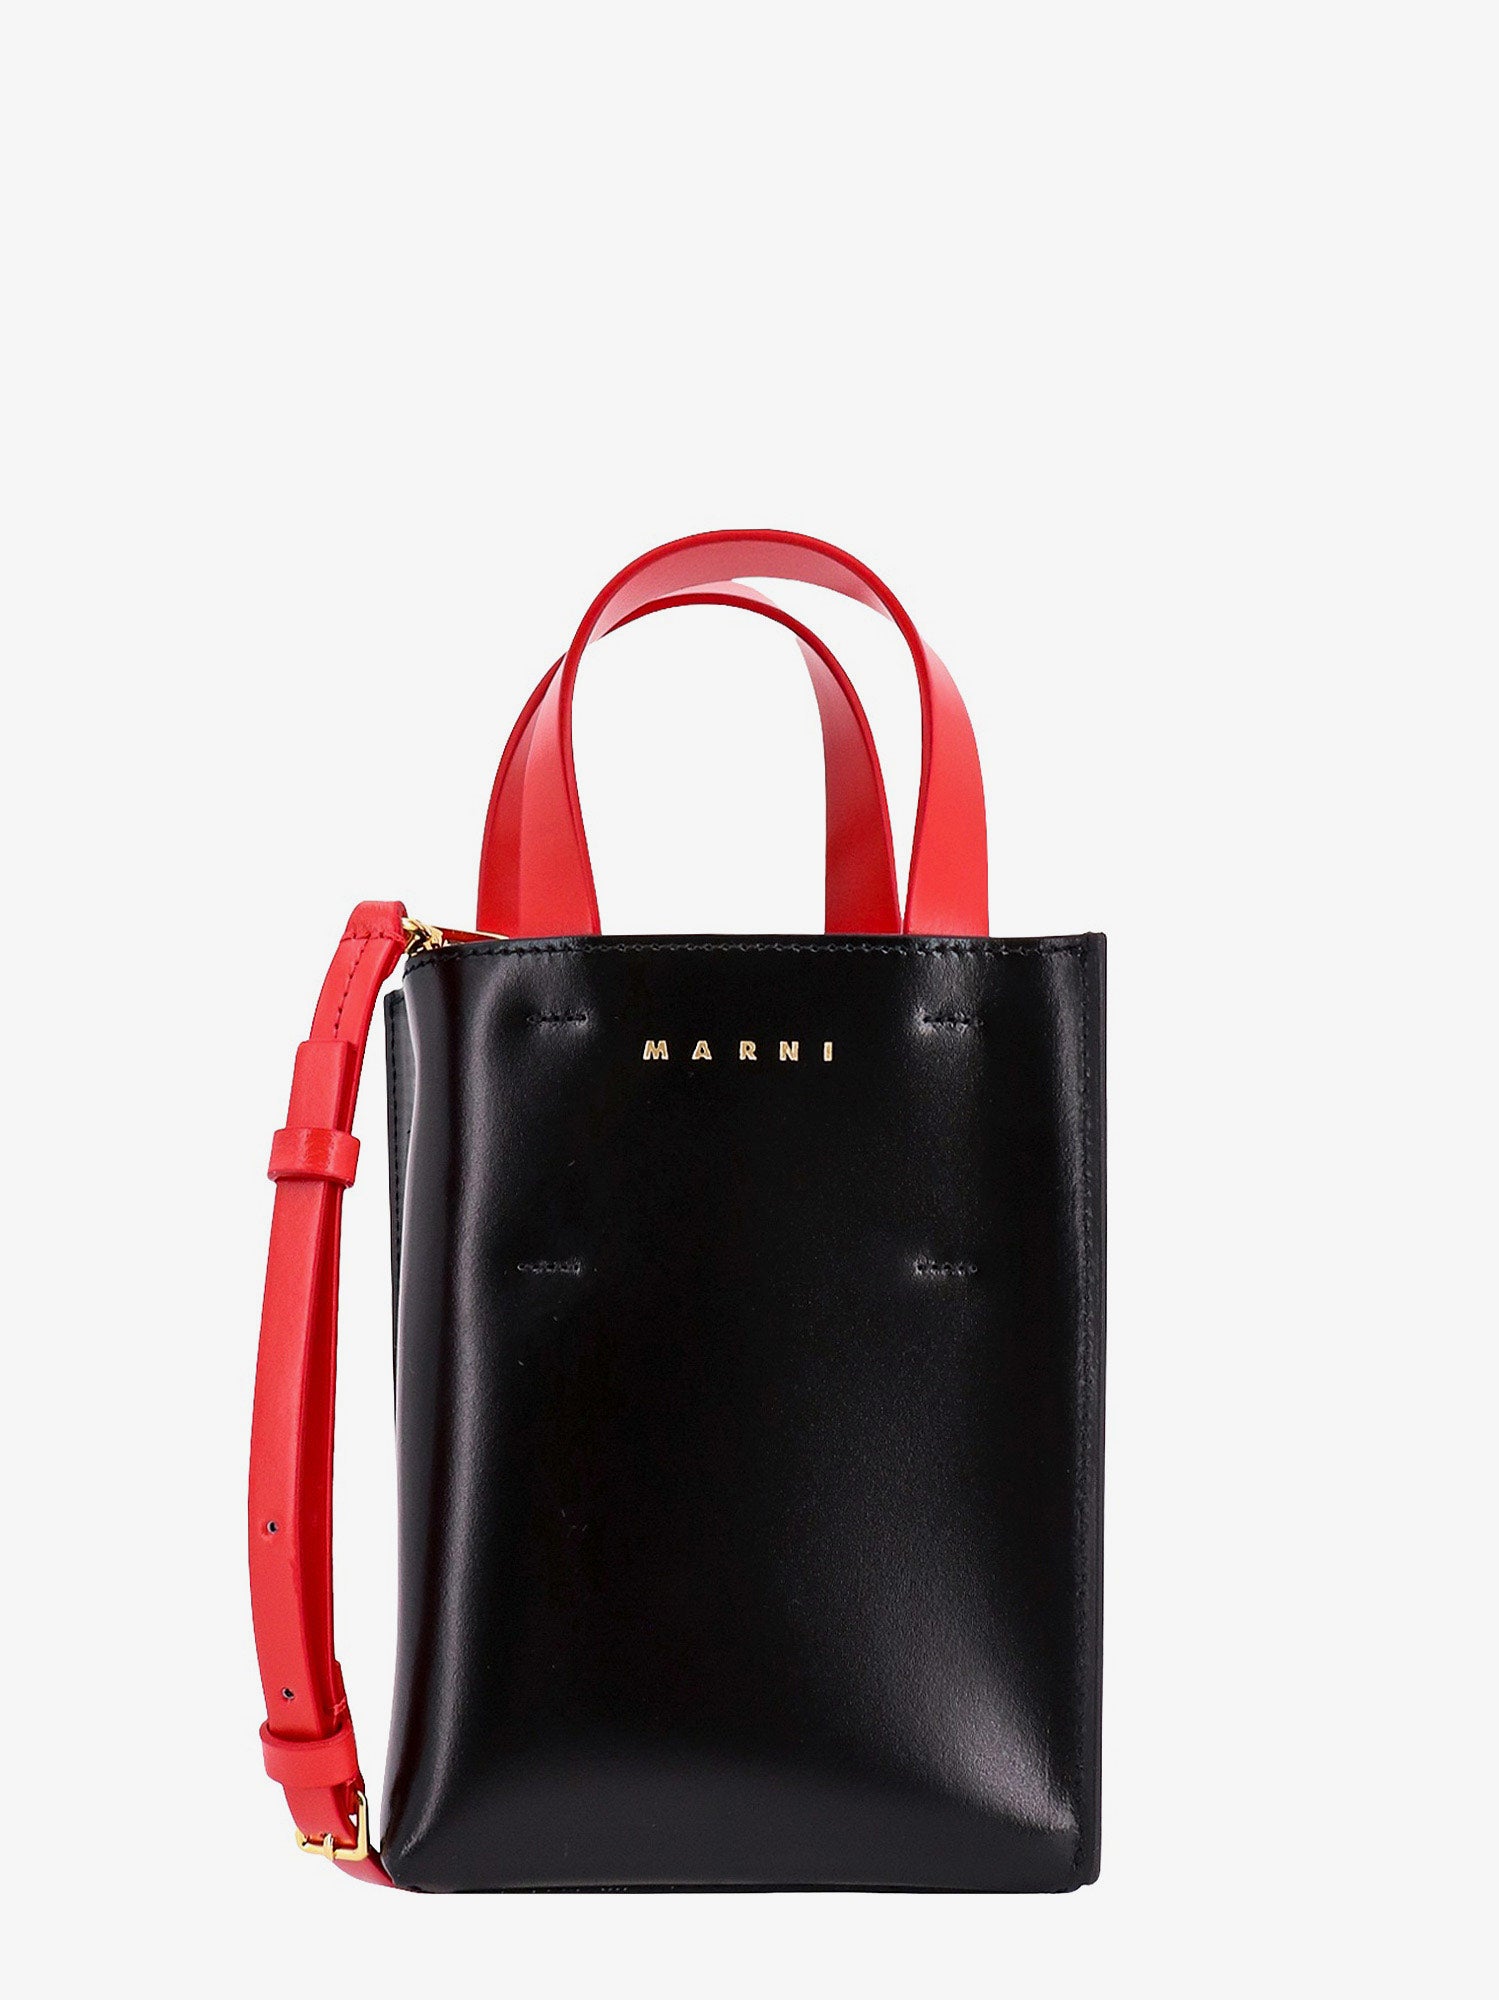 Marni Woman Multicolor Museo Small Tote Bag Black,Grey,Red OS Pattern,Solid Colour Leather